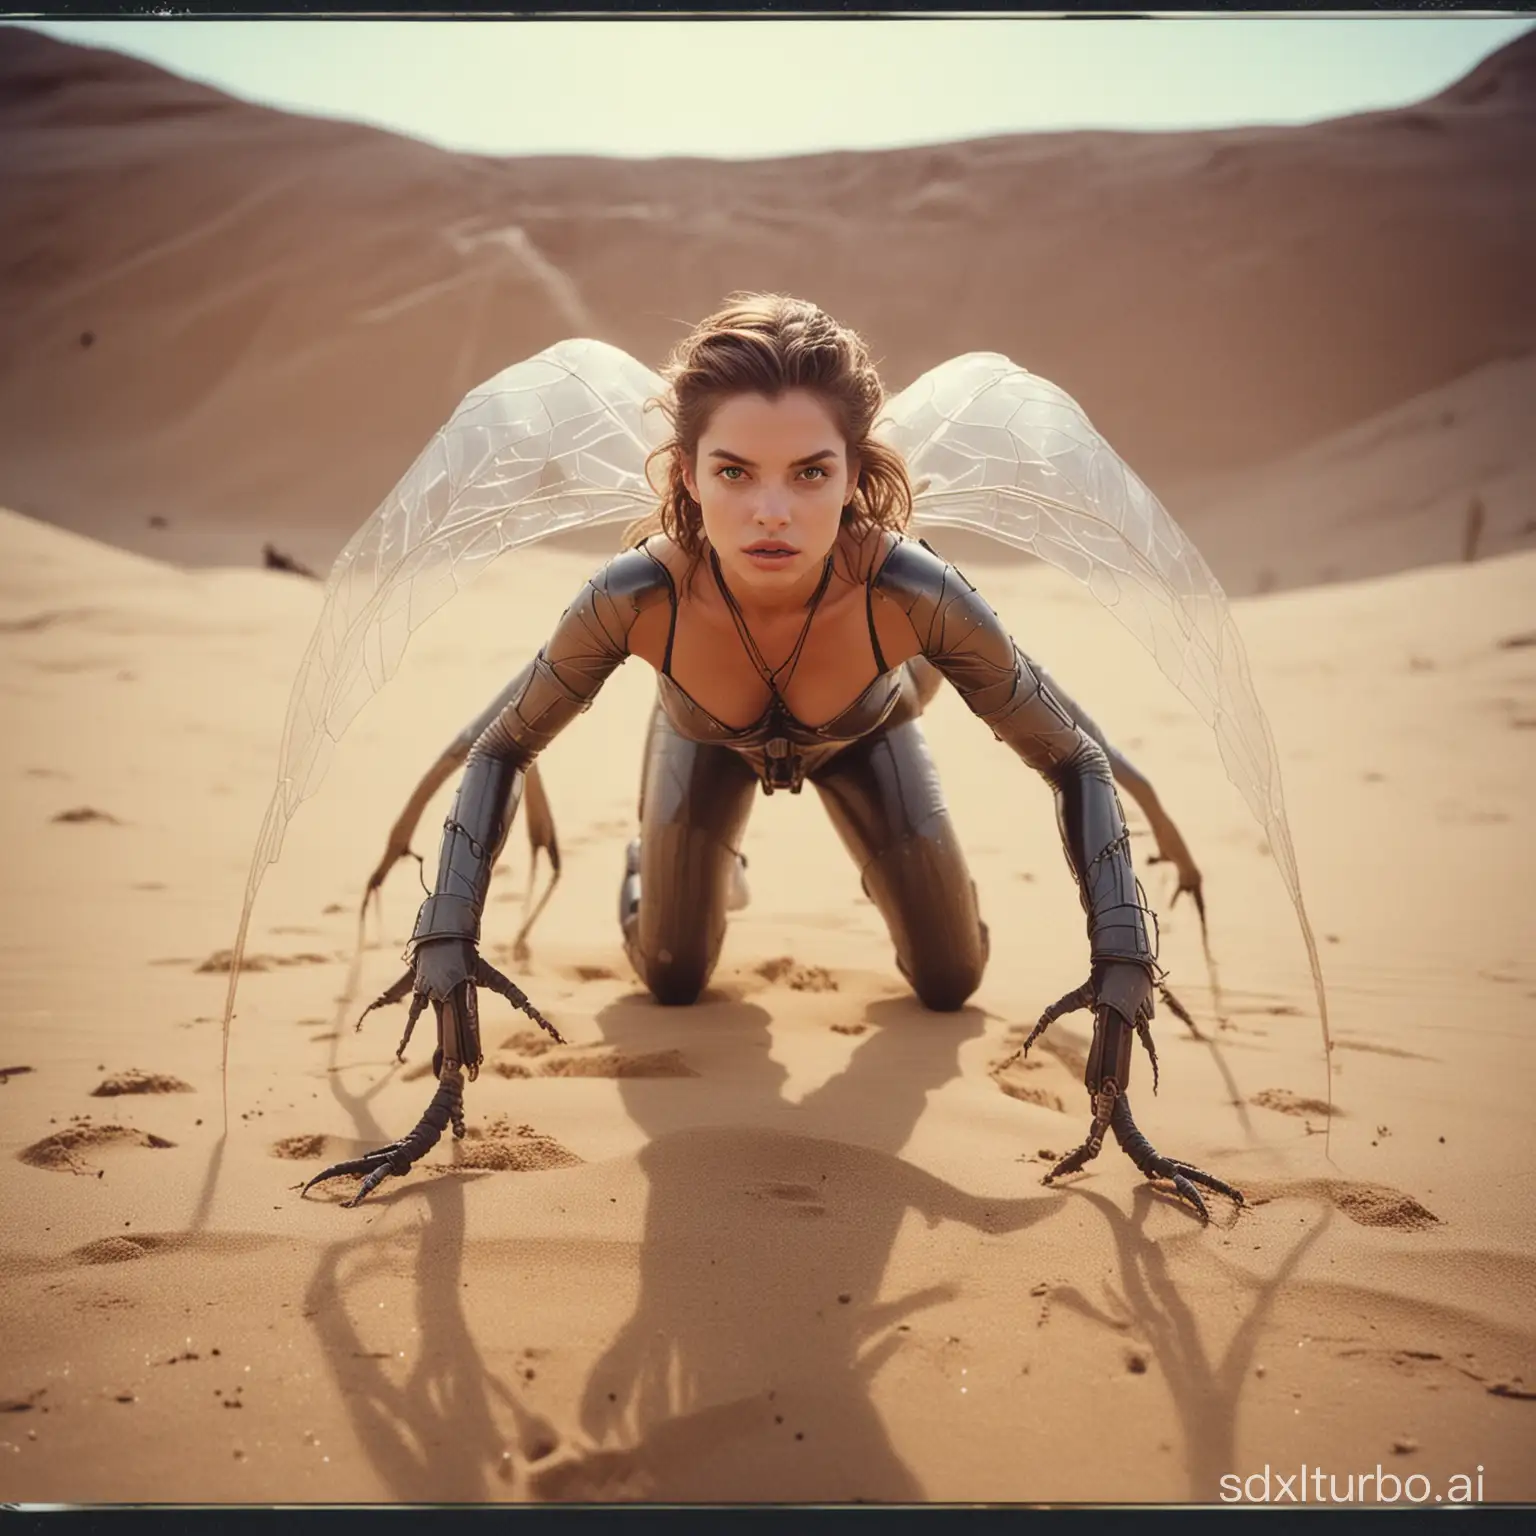 InsectLike-Valkyrie-in-Dune-2021-Arena-Polaroid-Portrait